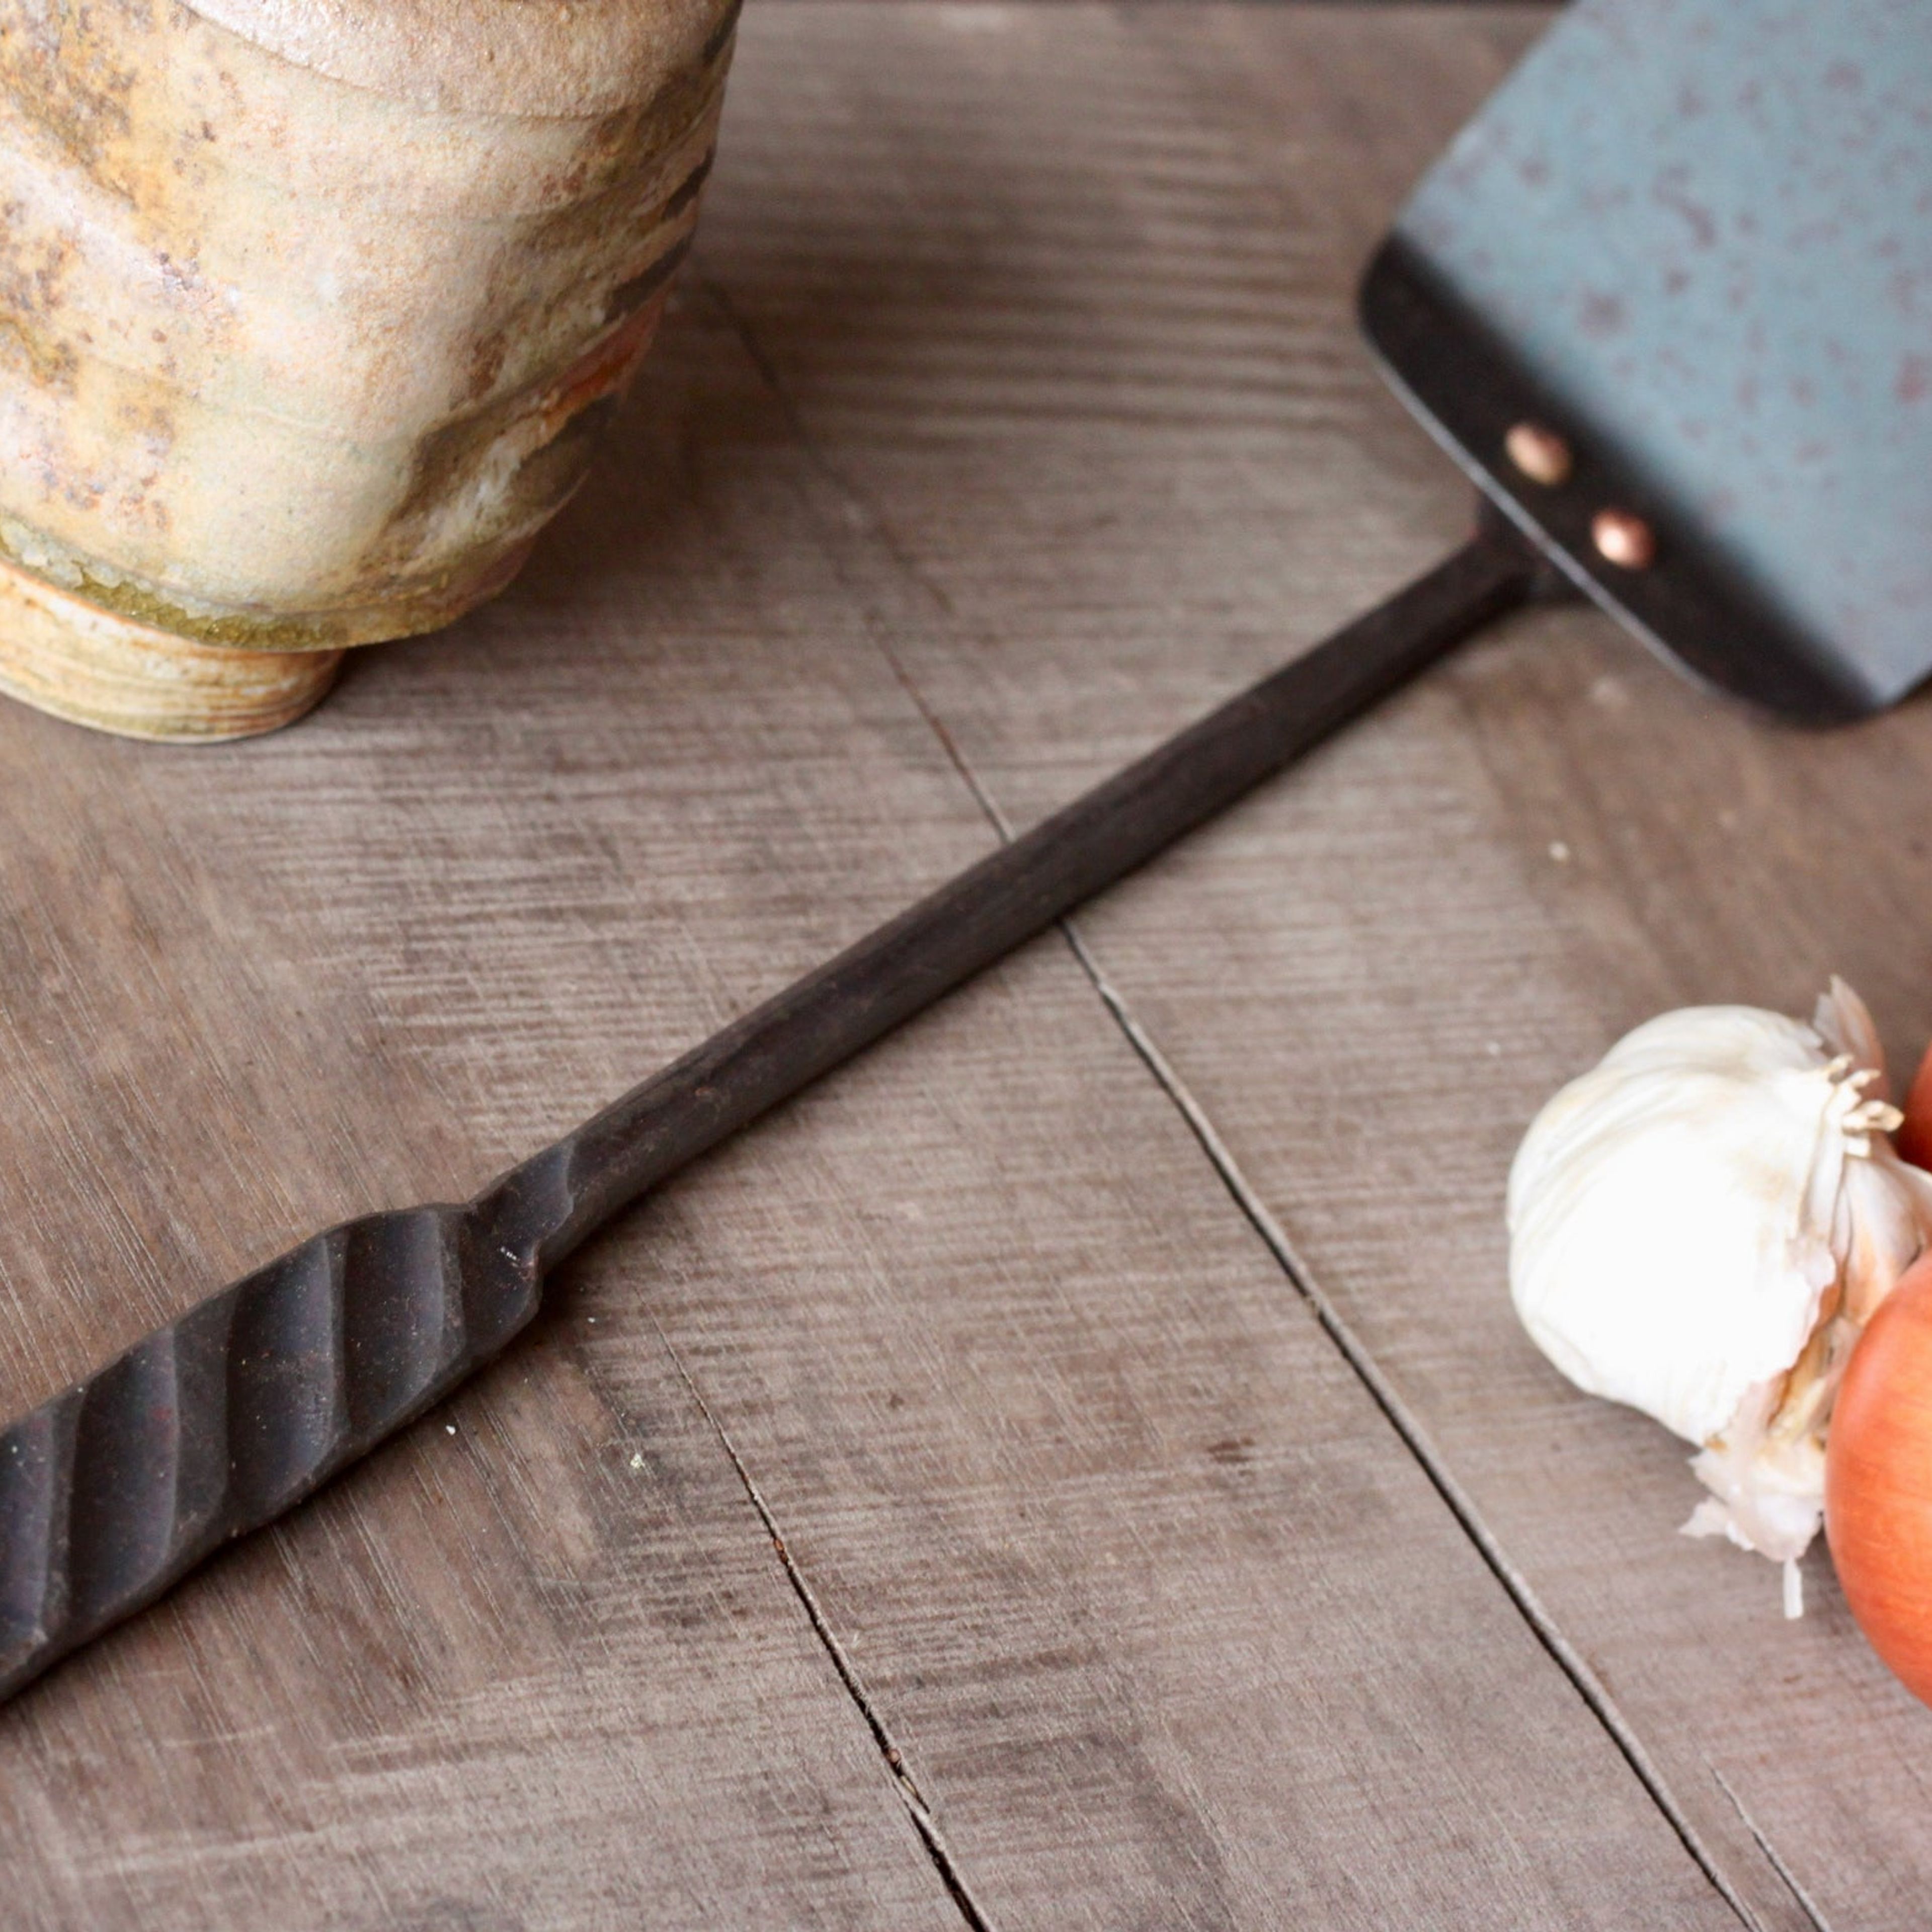 Grilling Spatula: "Grill-Marked" Handle